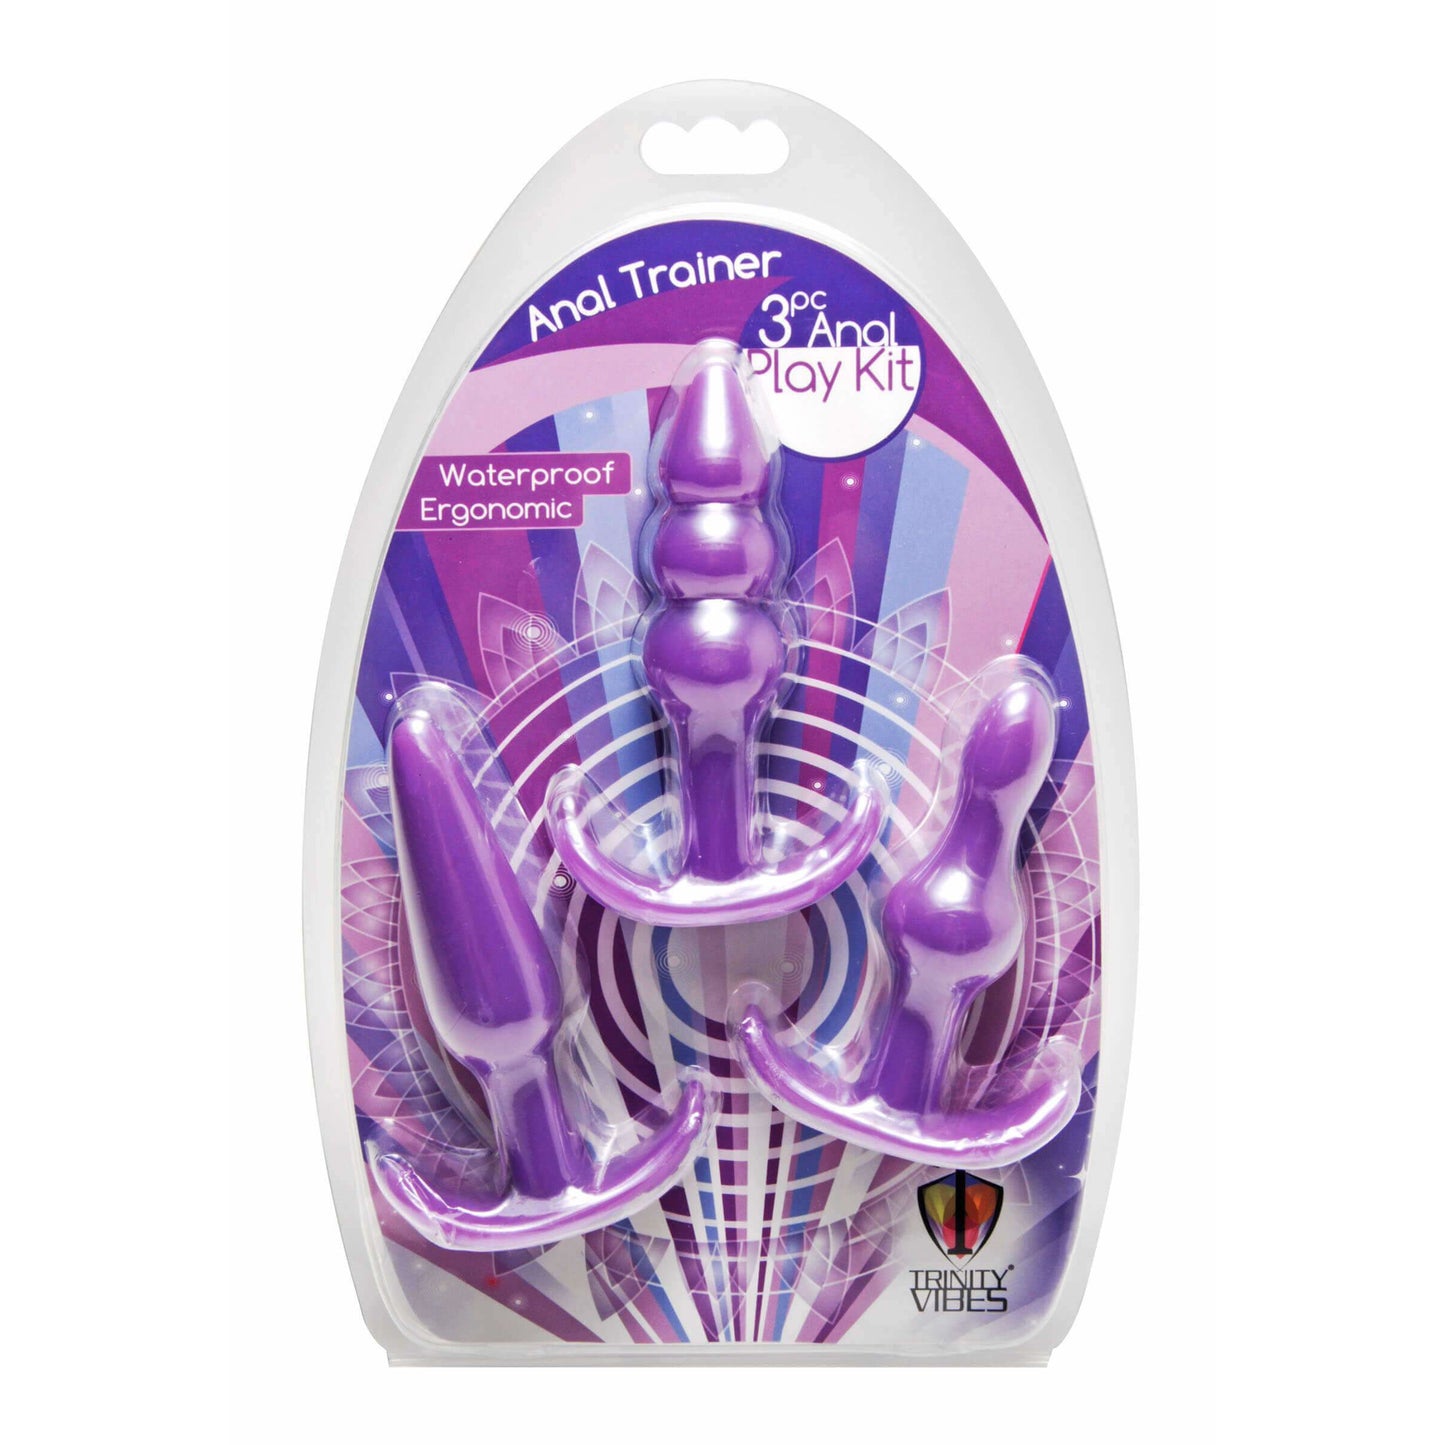 Anal Trainer - 3 Piece Anal Play Kit - XR Brands Trinity Vibes - The Bigger O - online sex toy shop USA, Canada & UK shipping available